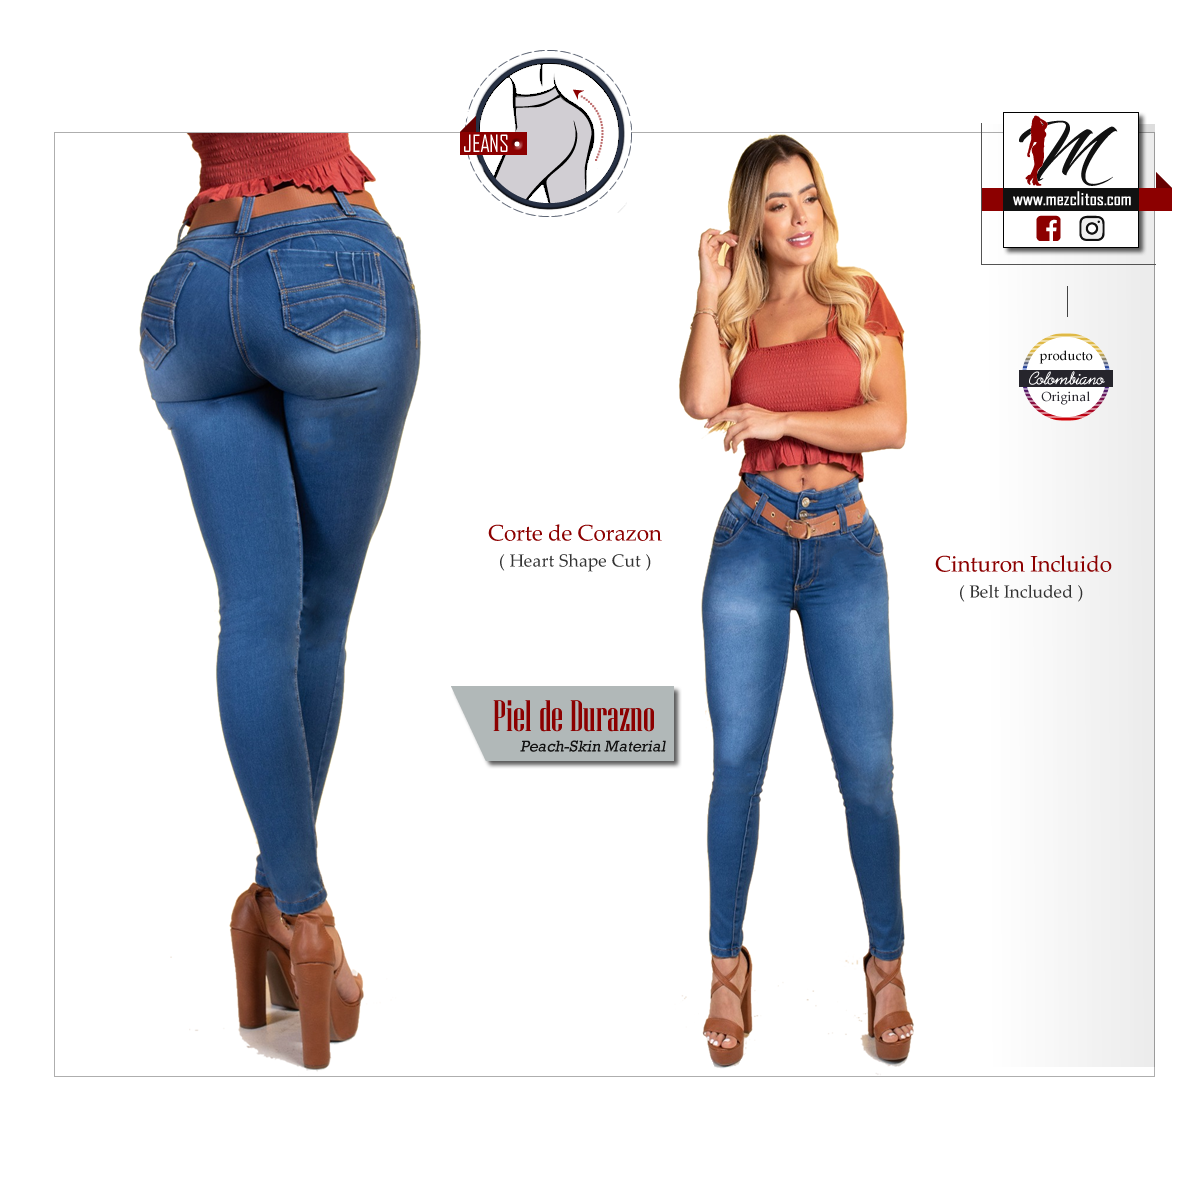 Jeanscol  Jeans colombianos